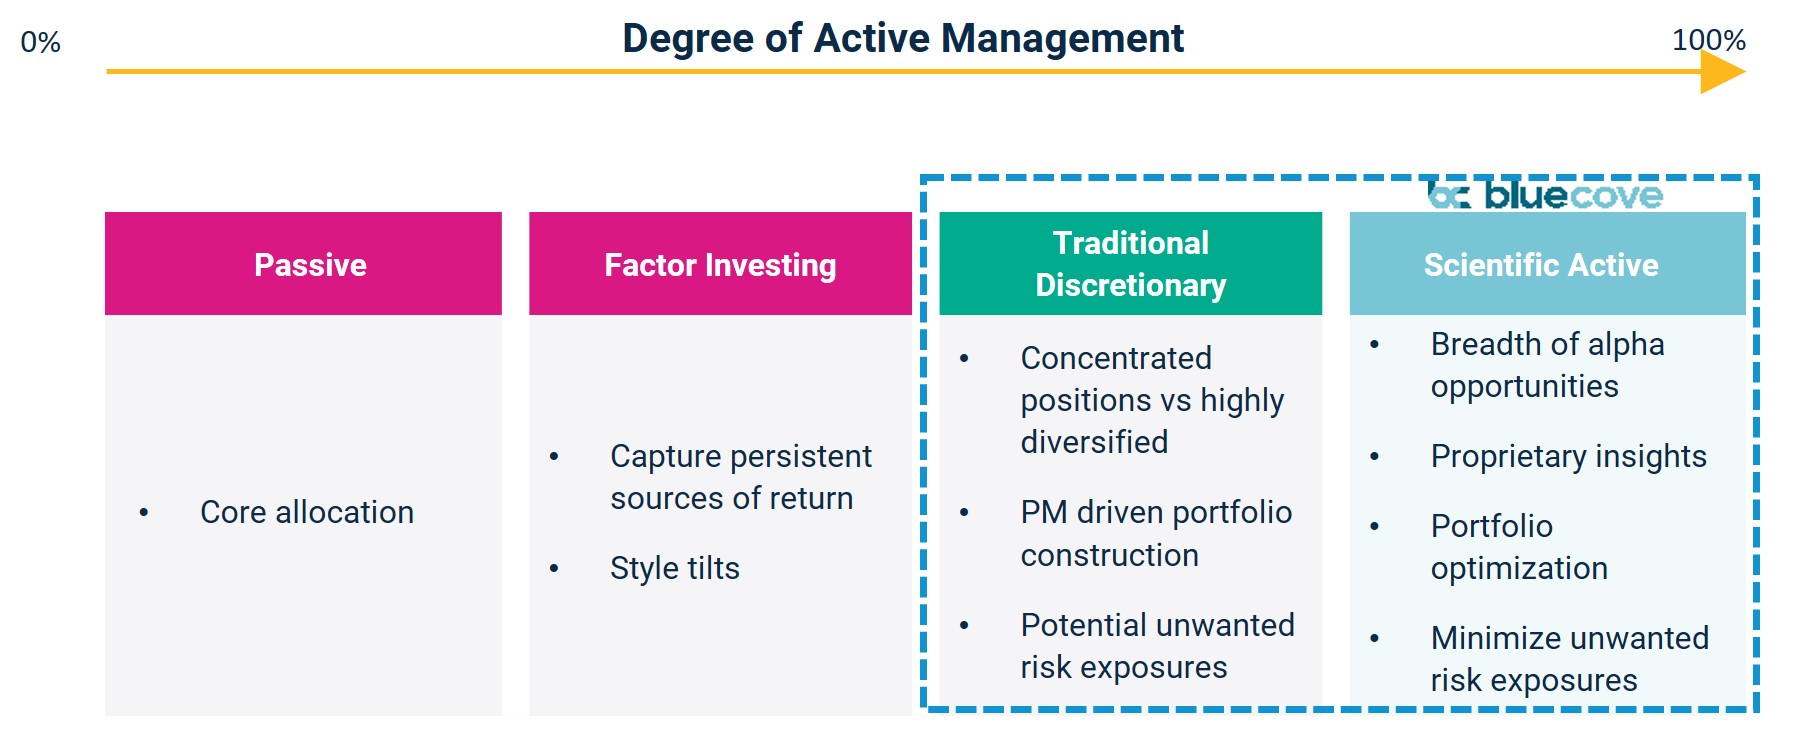 sihy_strategy_profile_degrees_of_active_management.jpg